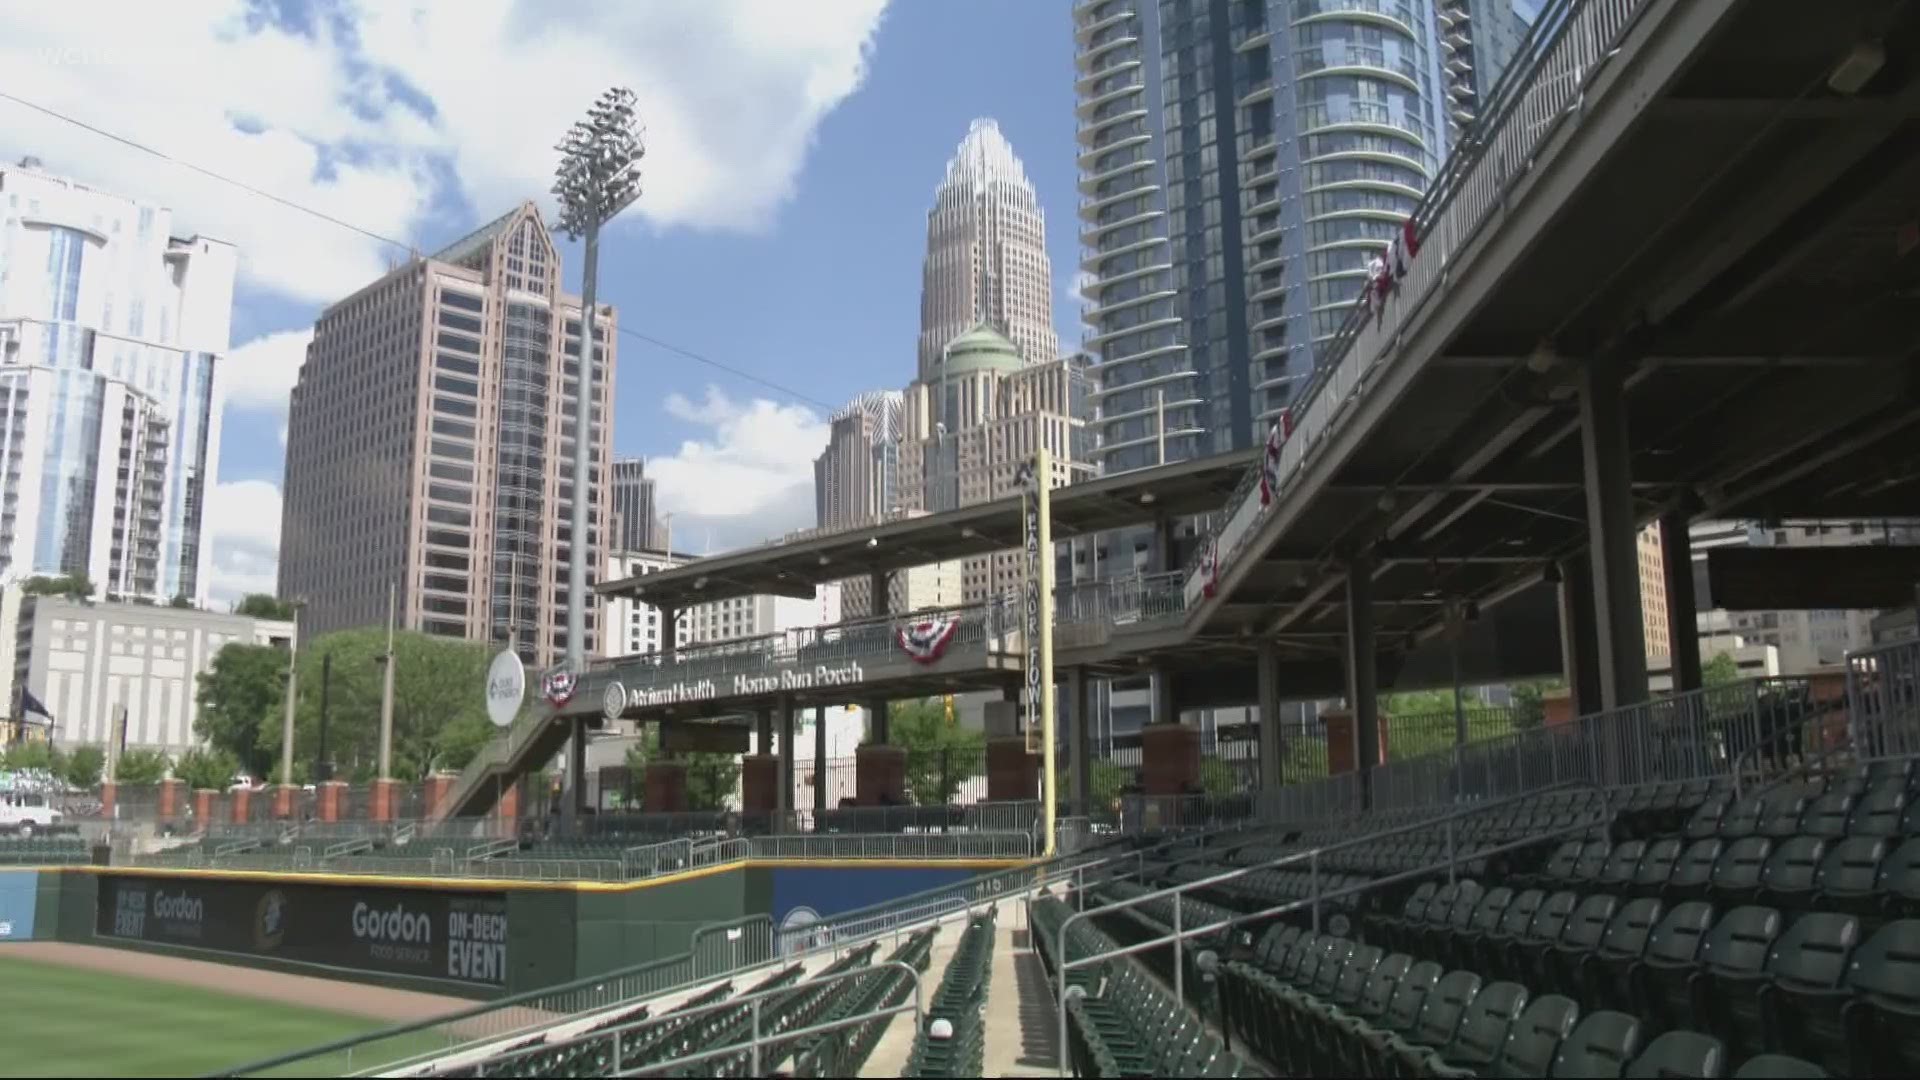 Does MLB lockout also affect the schedule for Charlotte Knights